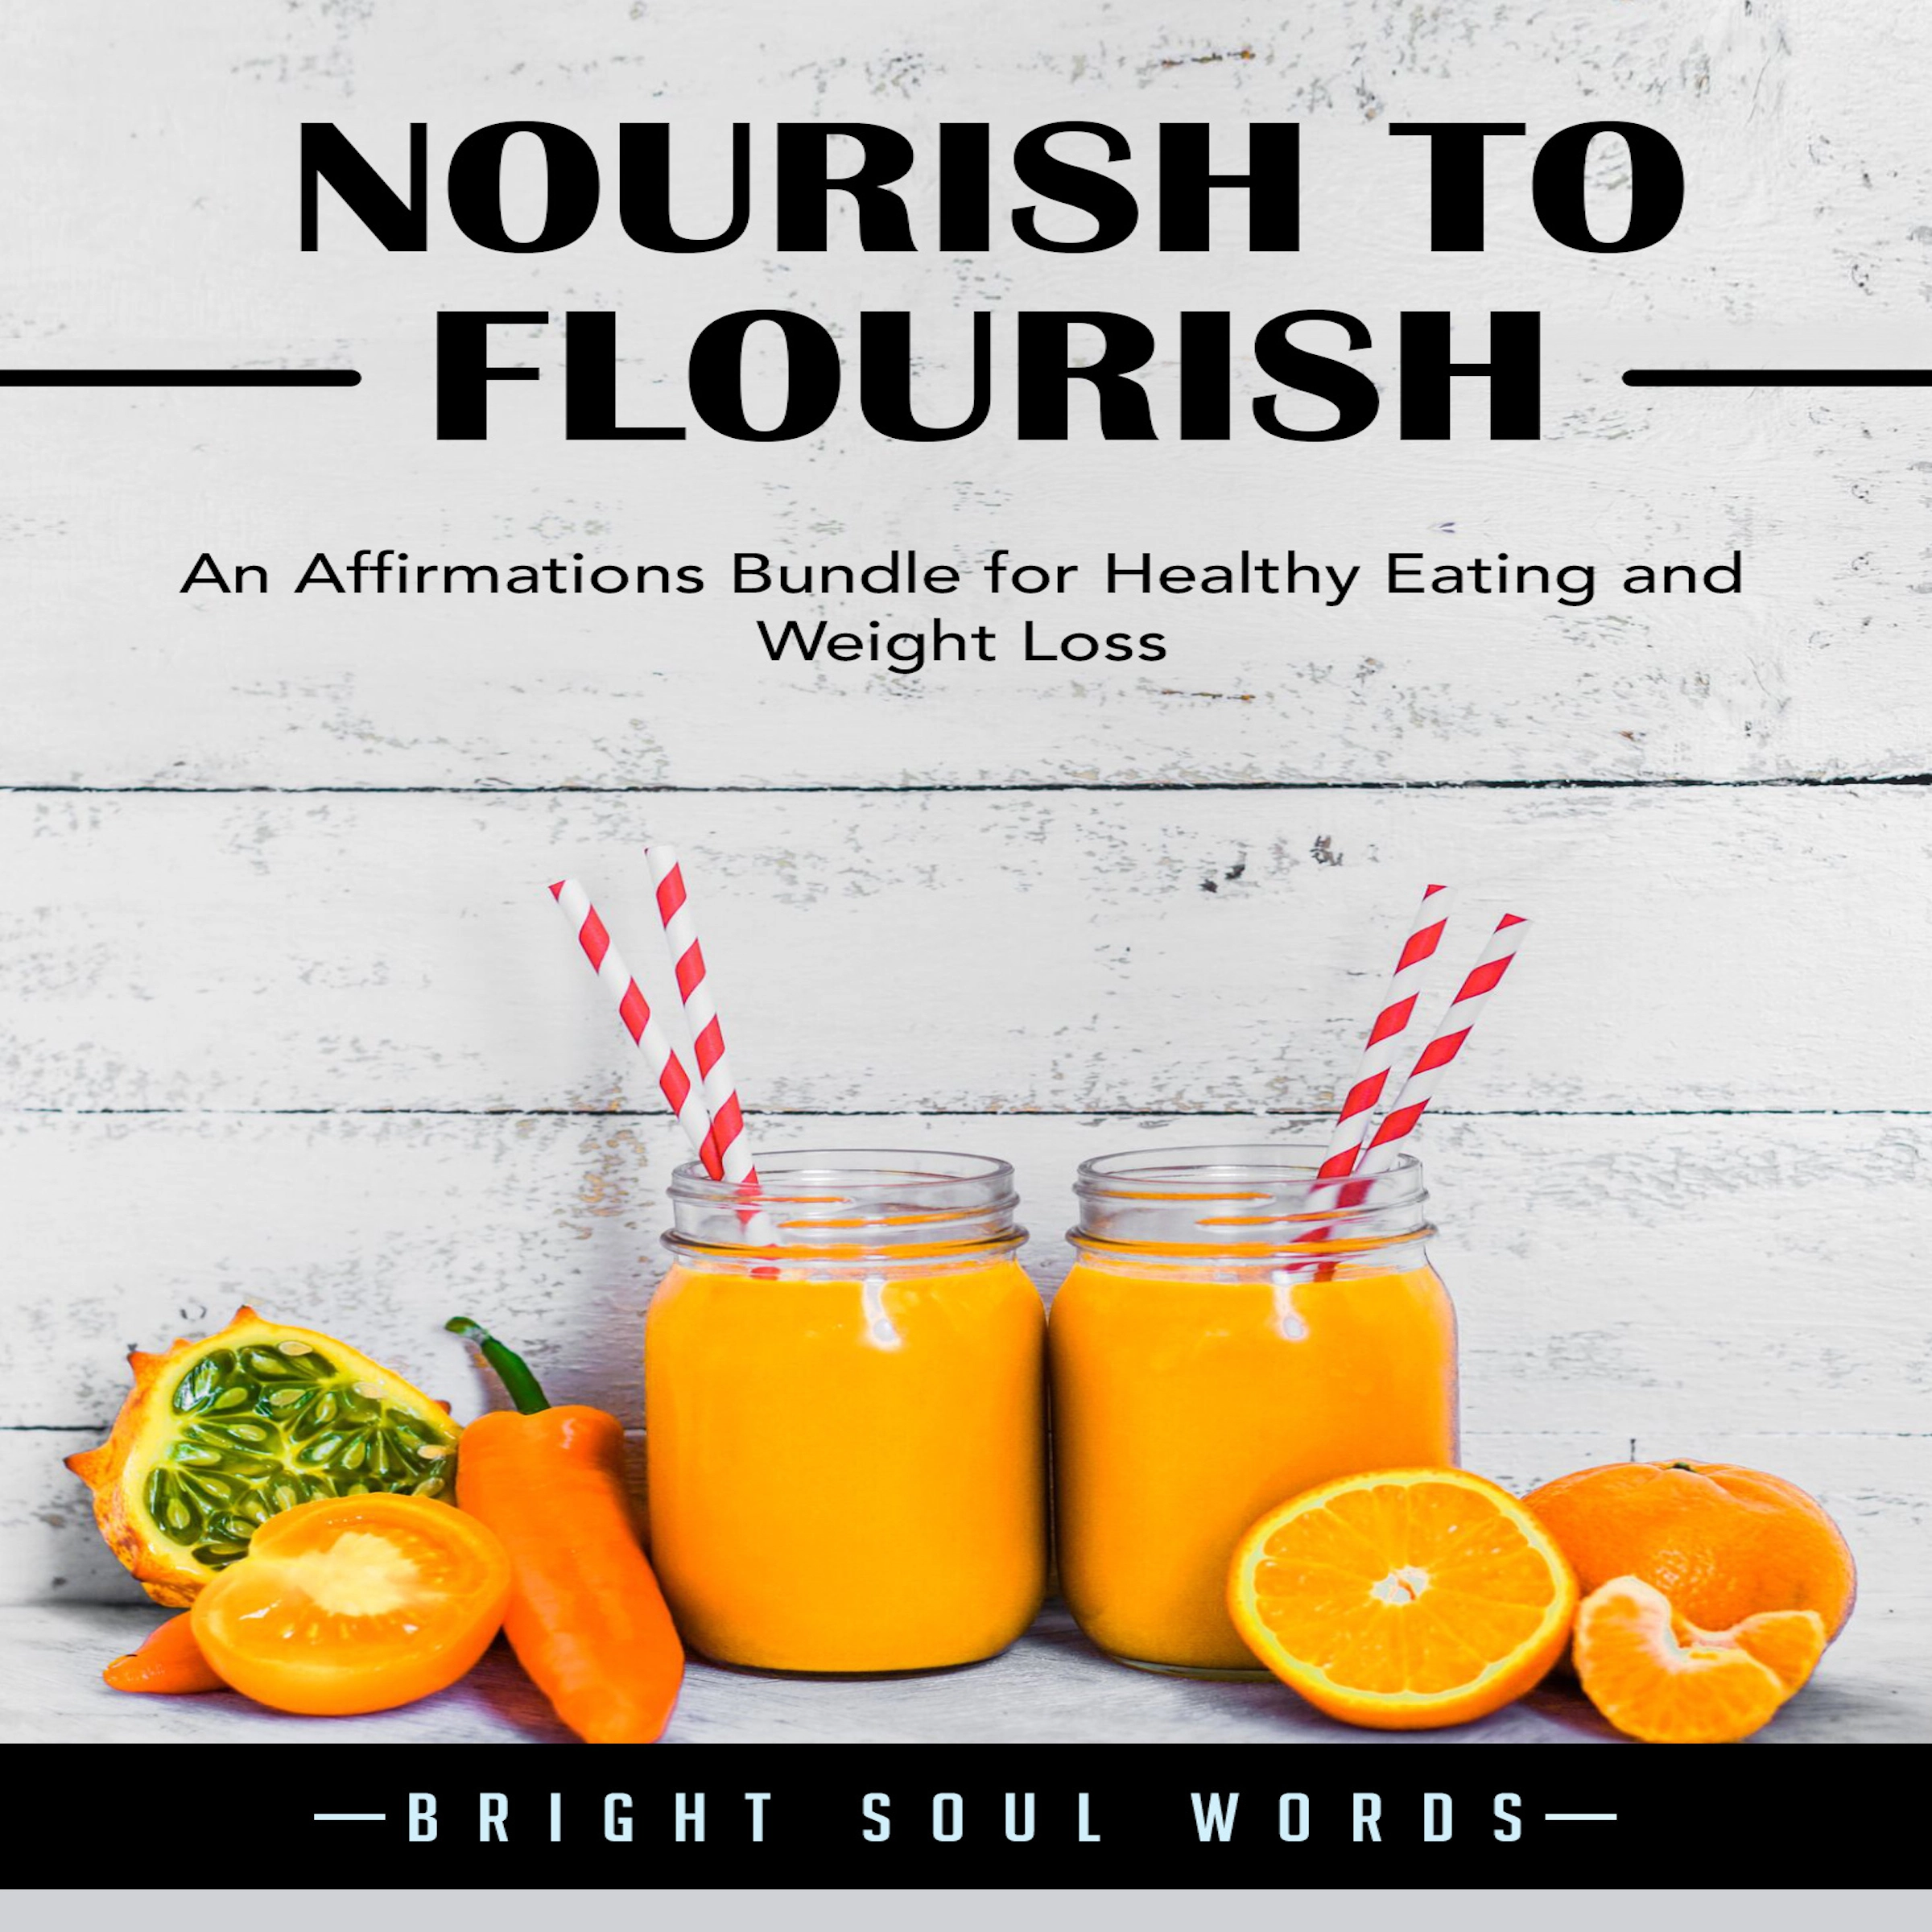 Nourish to Flourish: An Affirmations Bundle for Healthy Eating and Weight Loss Audiobook by Bright Soul Words